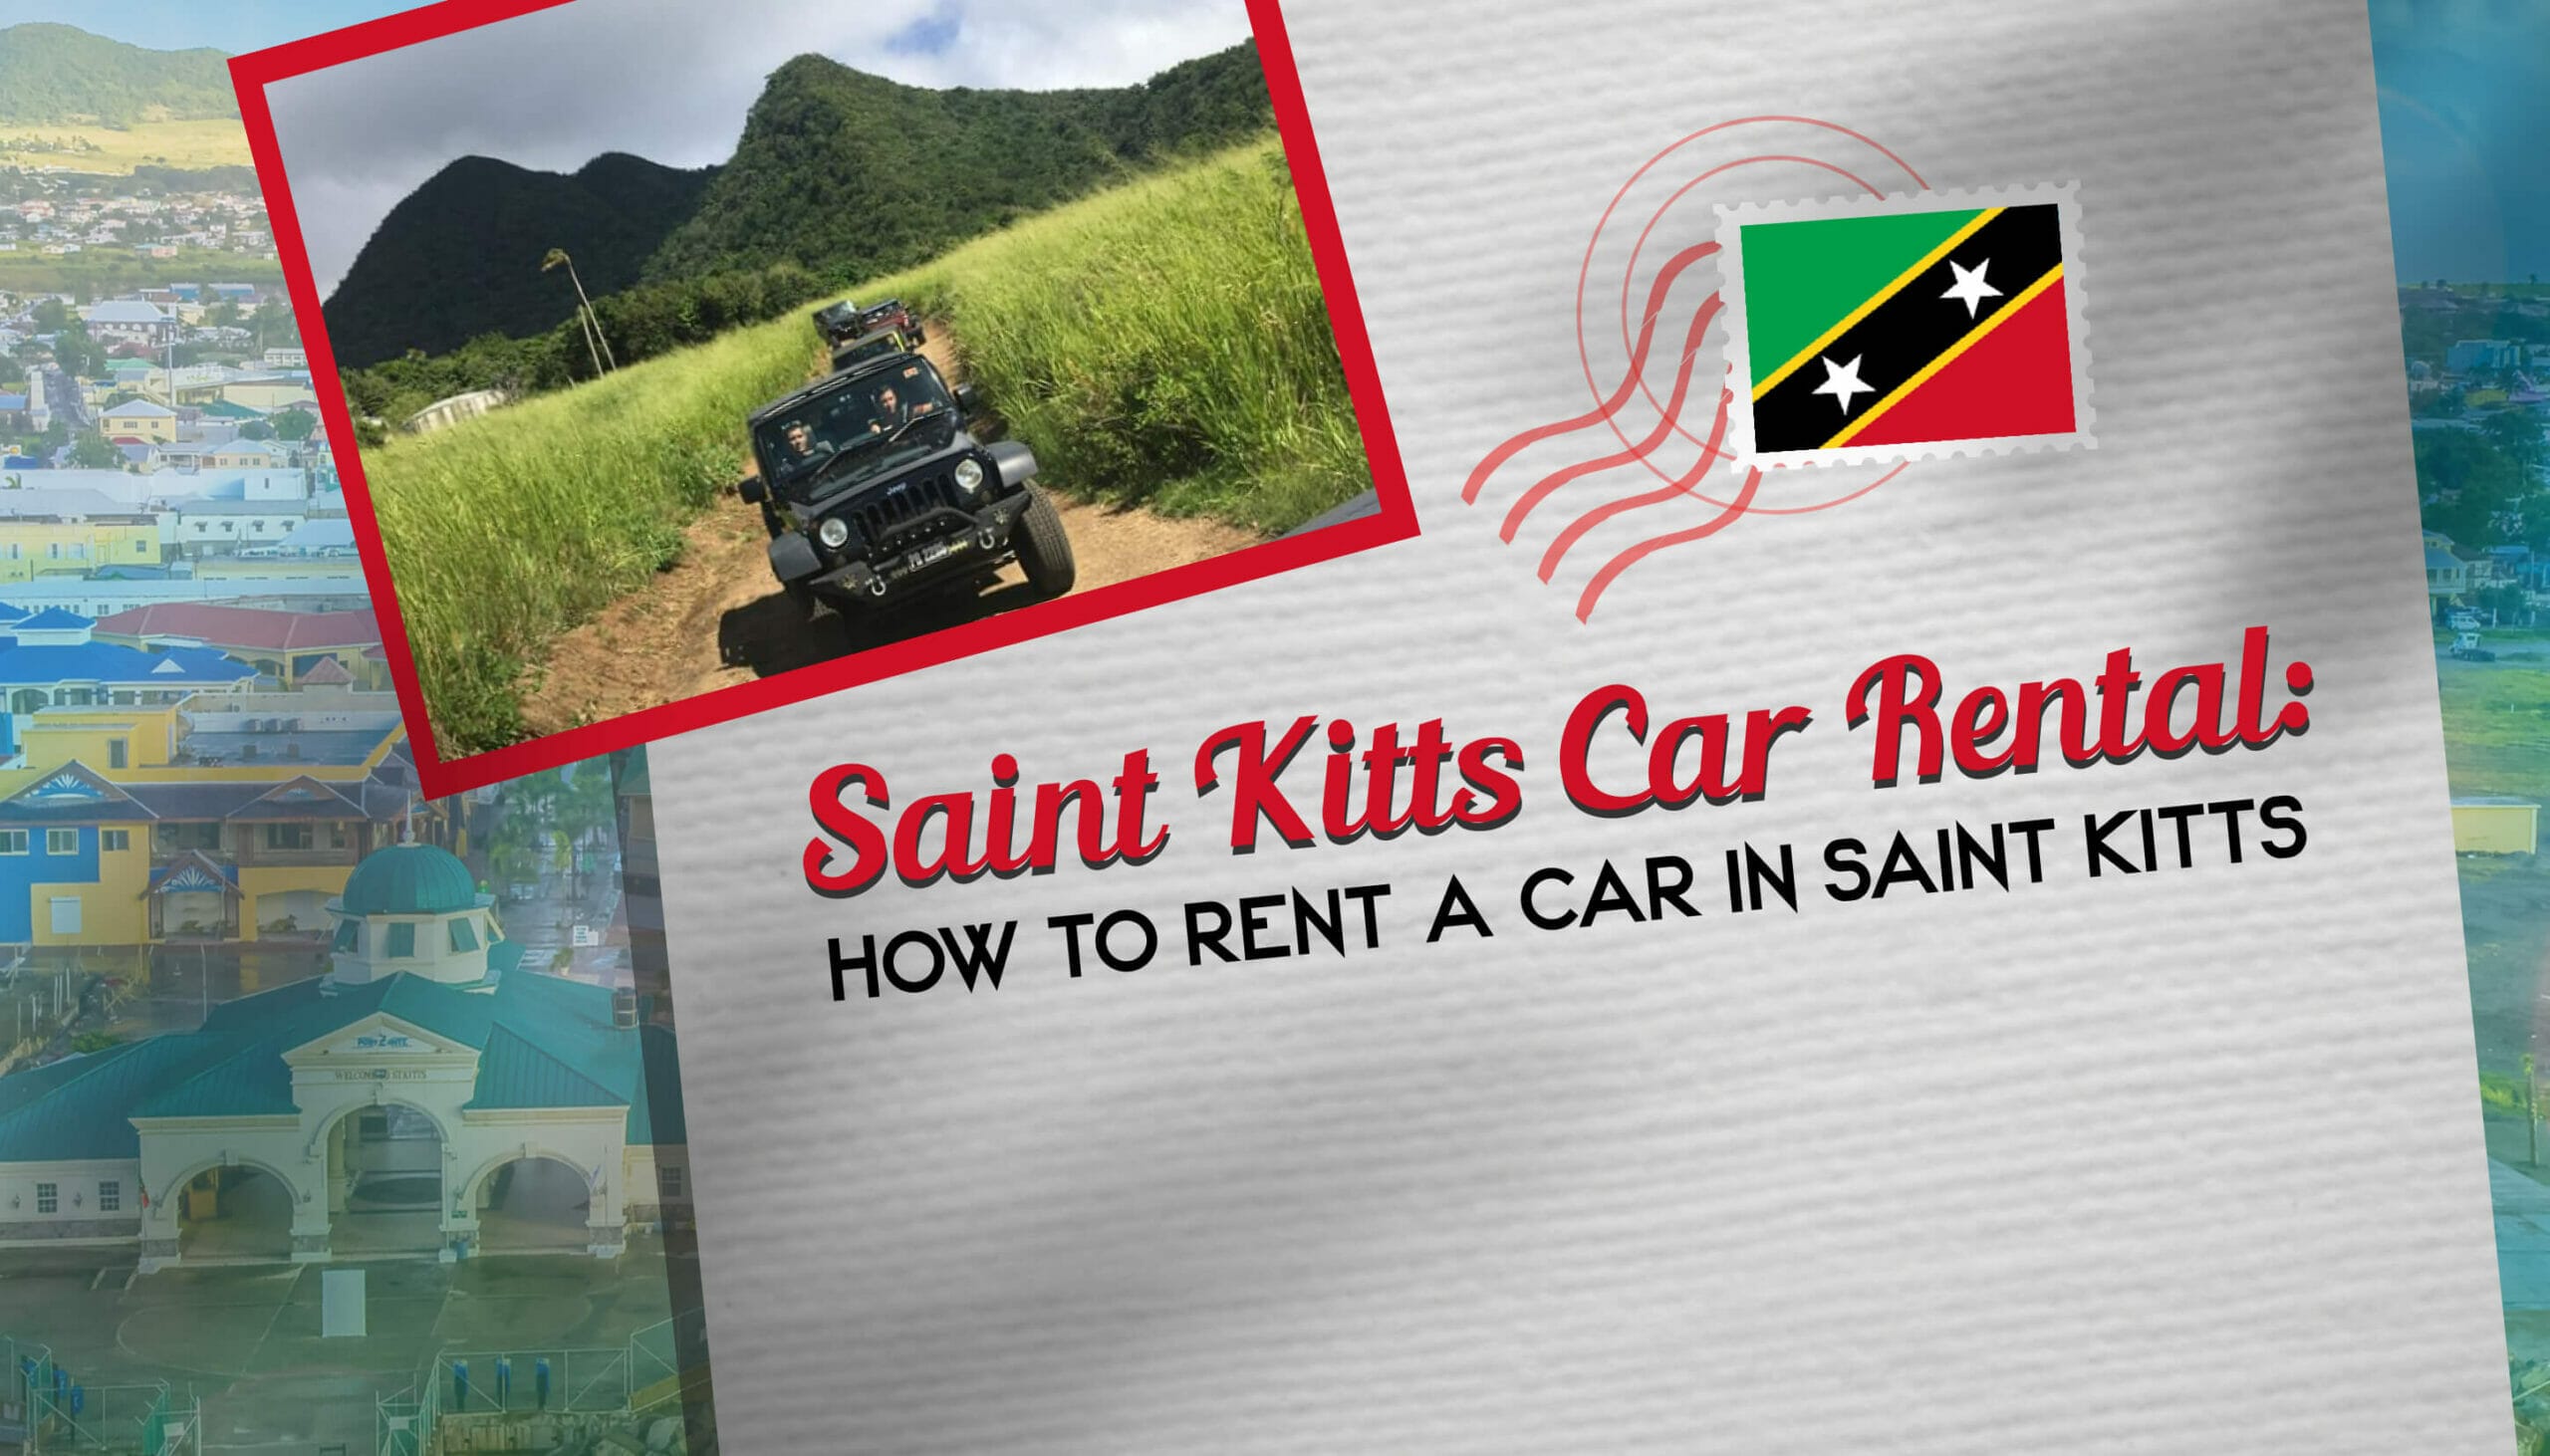 Saint Kitts Car Rental How to Rent a Car in Saint Kitts